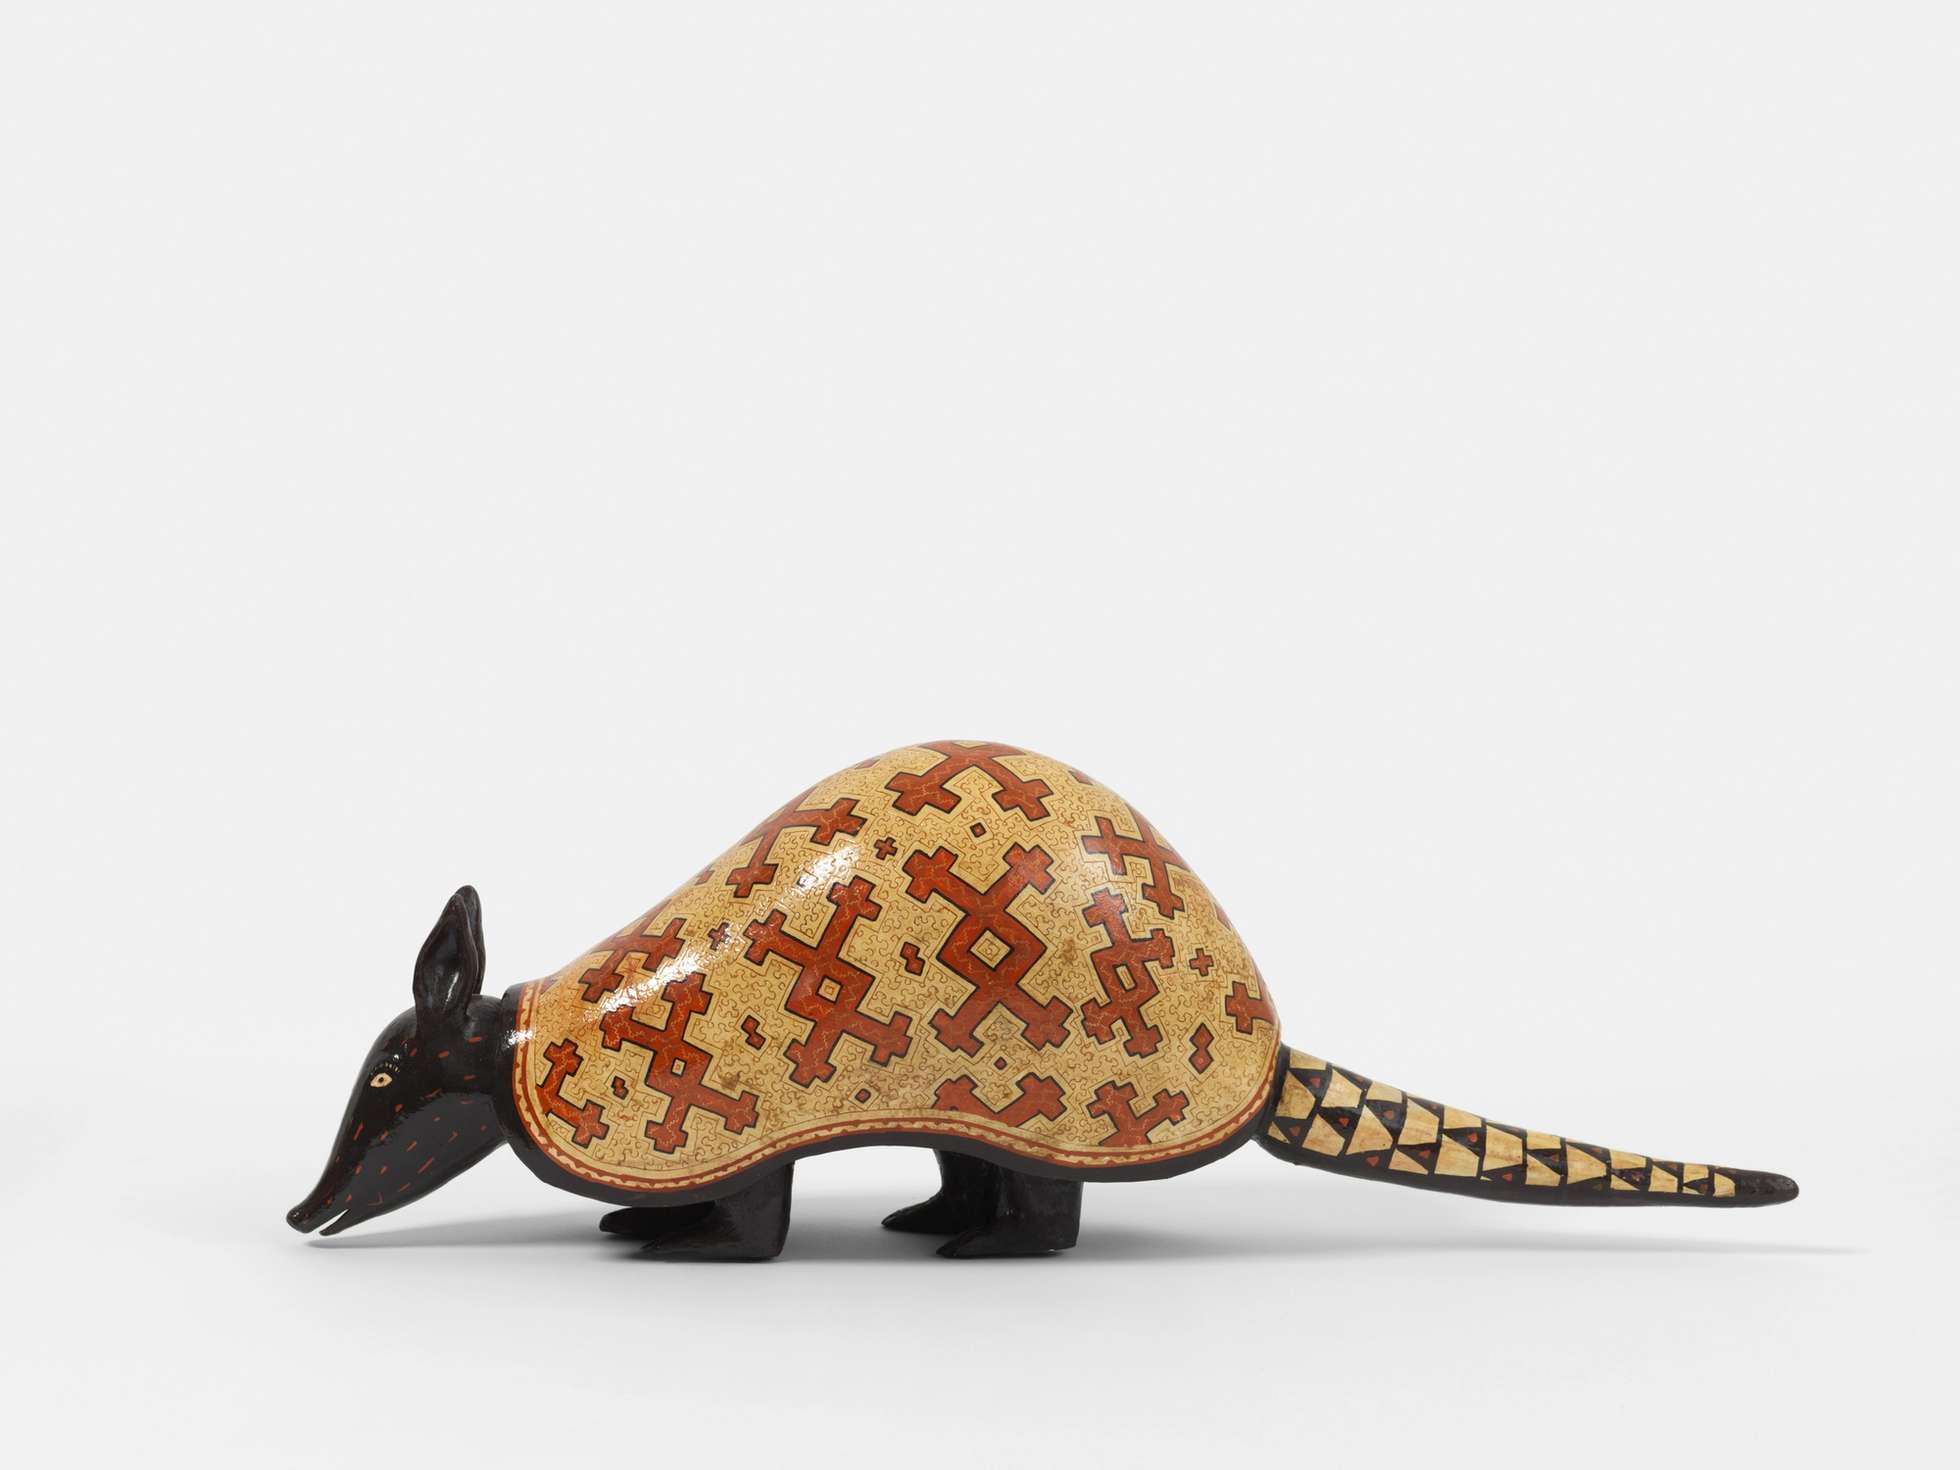 A ceramic sculpture of an armadillo with a black head, tail, and feat, and an outer shell with red and beige geometric patterns.